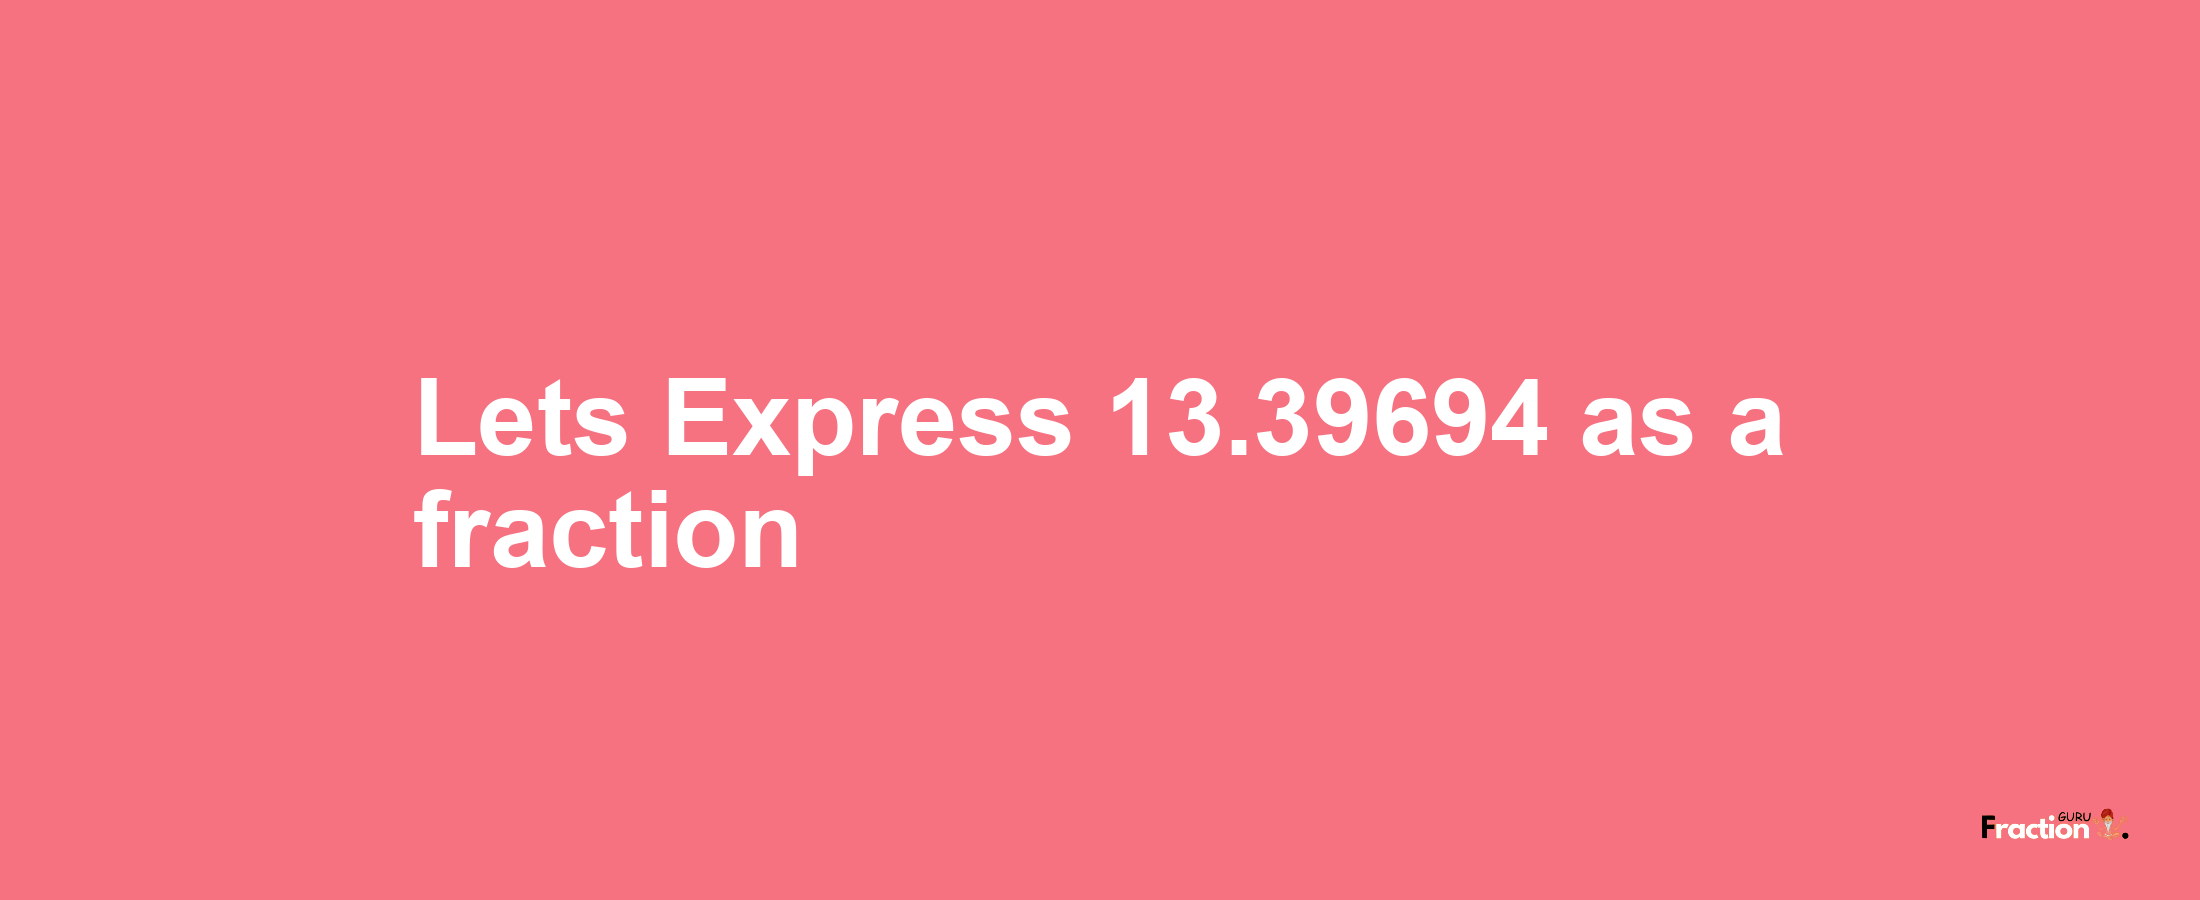 Lets Express 13.39694 as afraction